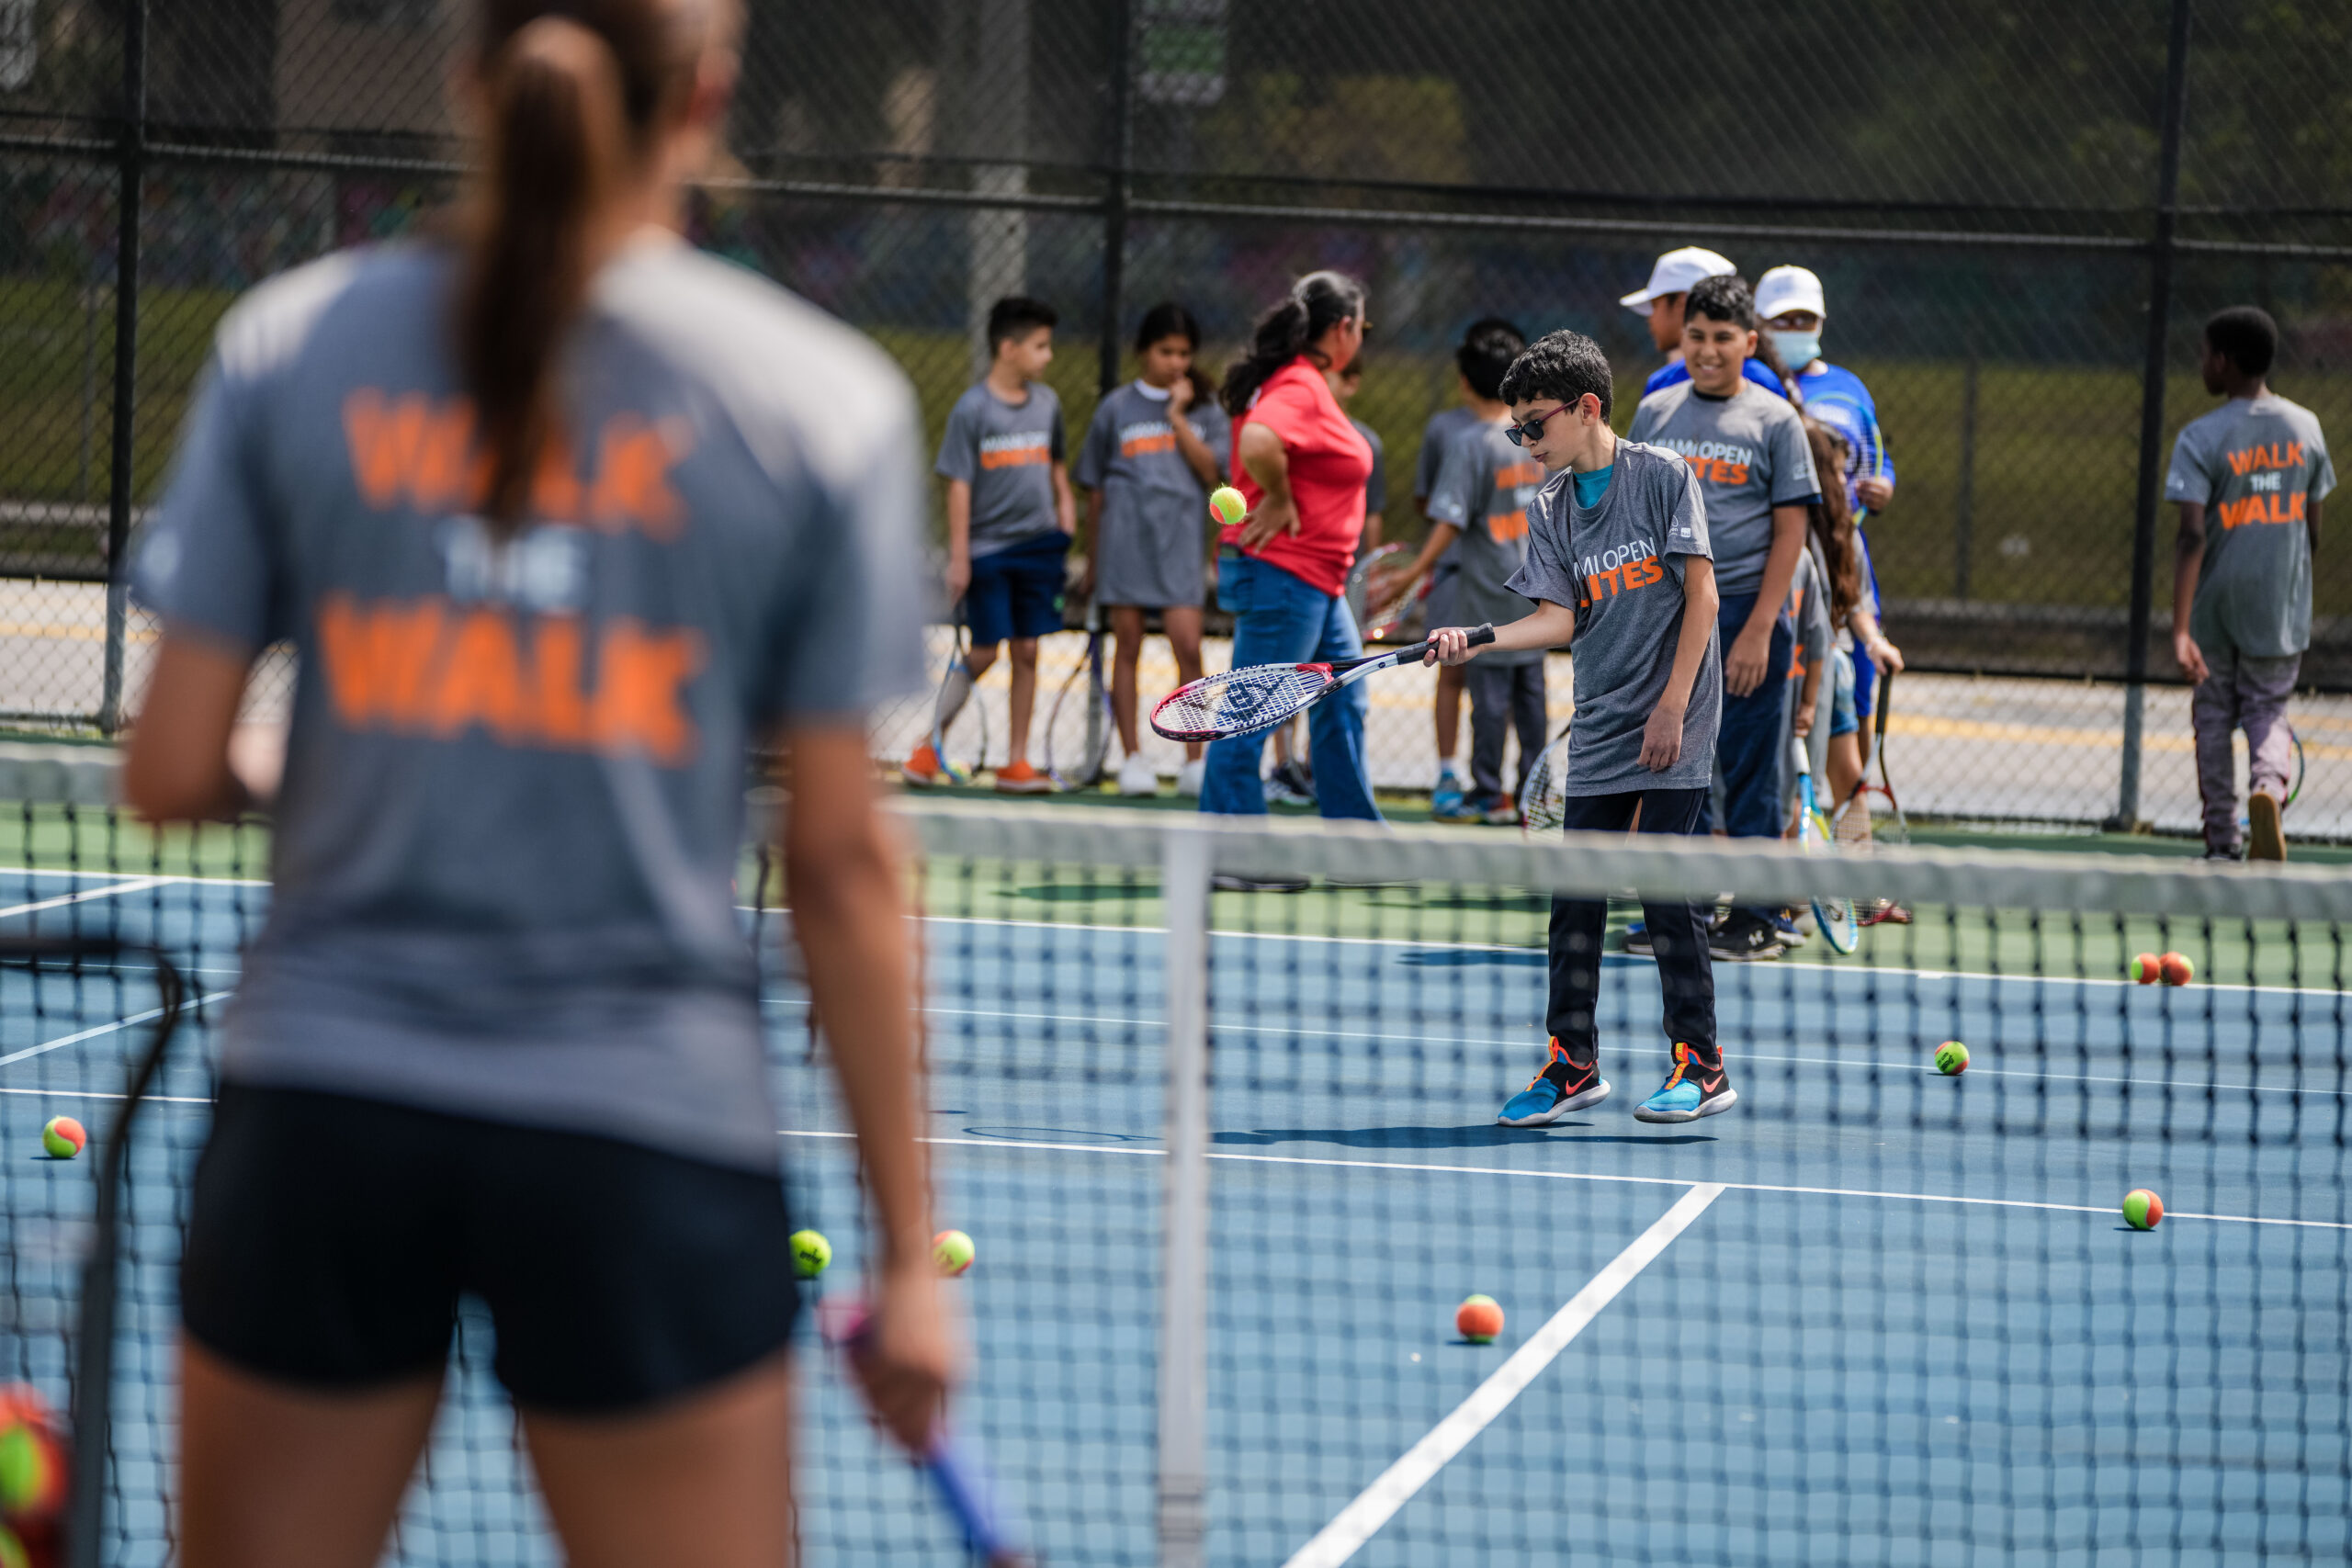 Kids on-court during the Big Brothers, Big Sisters event at Moore Park in Miami on March 20, 2023.